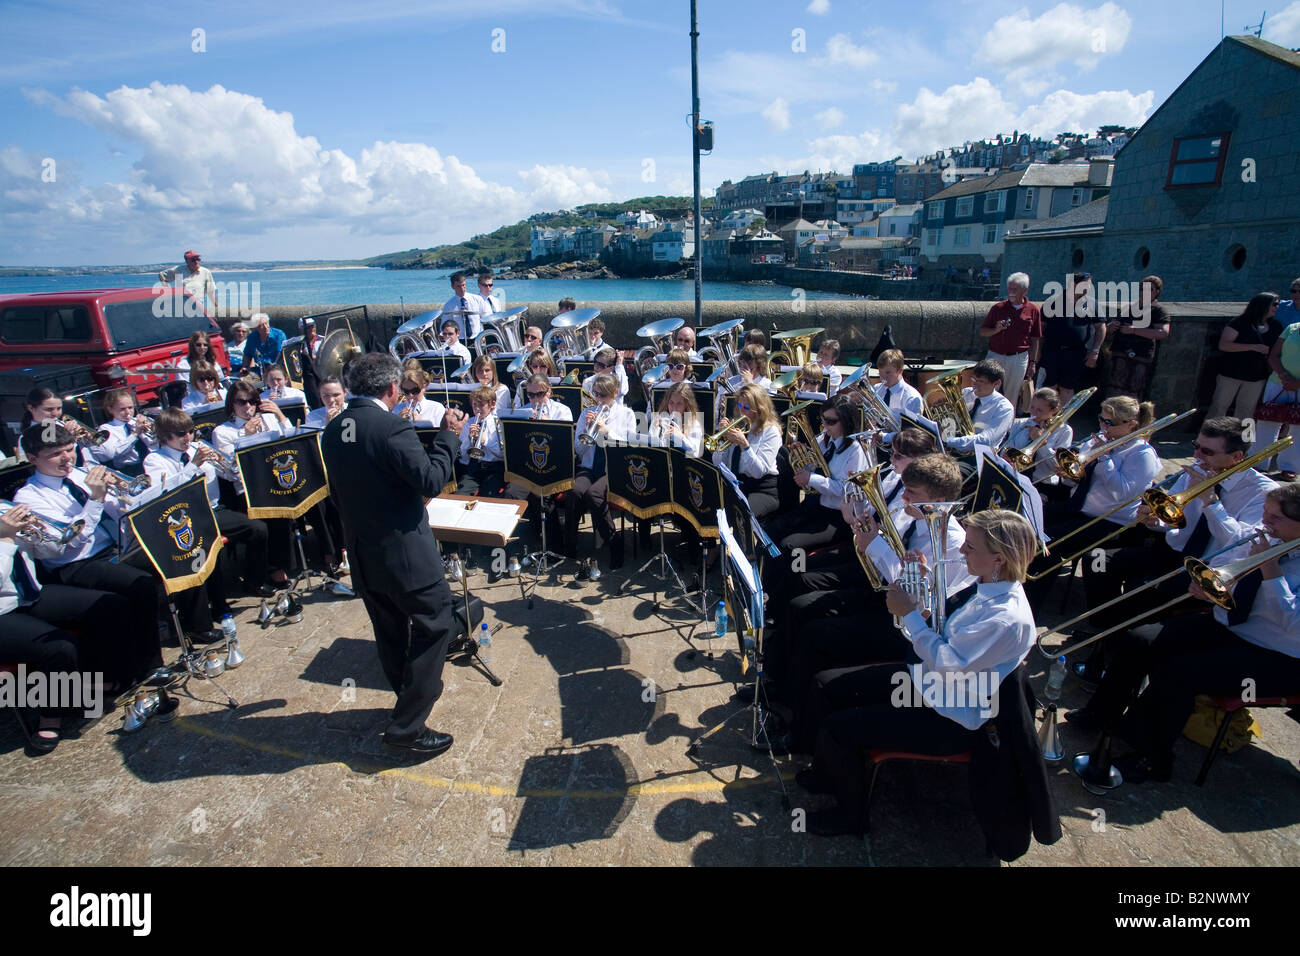 Camborne Youth Brass Band play outdoors concert in open air at the harbour harbor St Ives Cornwall England UK United Kingdom GB Stock Photo